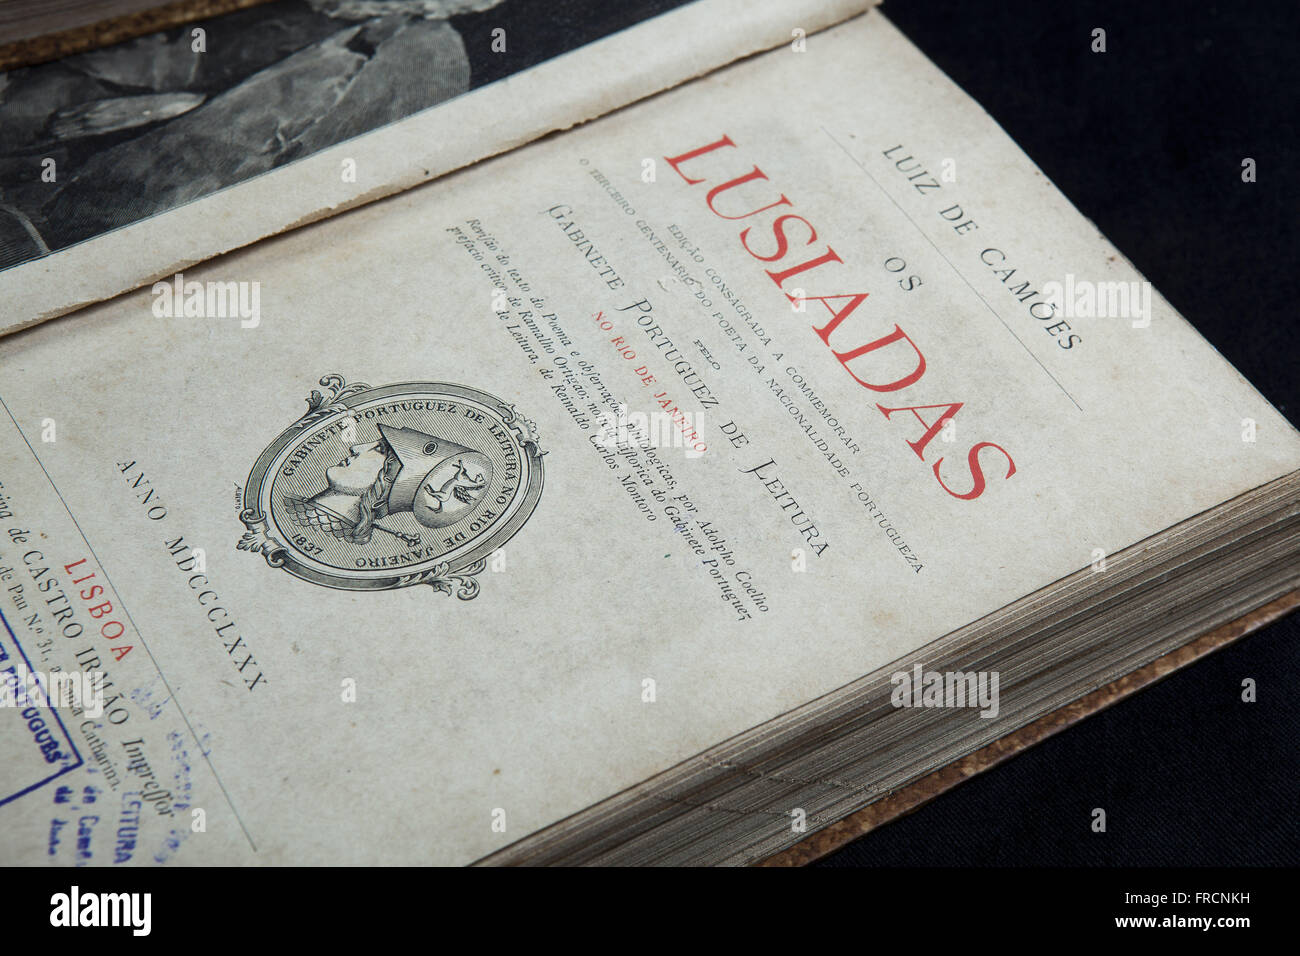 The book Lusiadas Luis Vaz de Camoes, 1572 in the collection of the Royal Portuguese Reading Cabinet Stock Photo